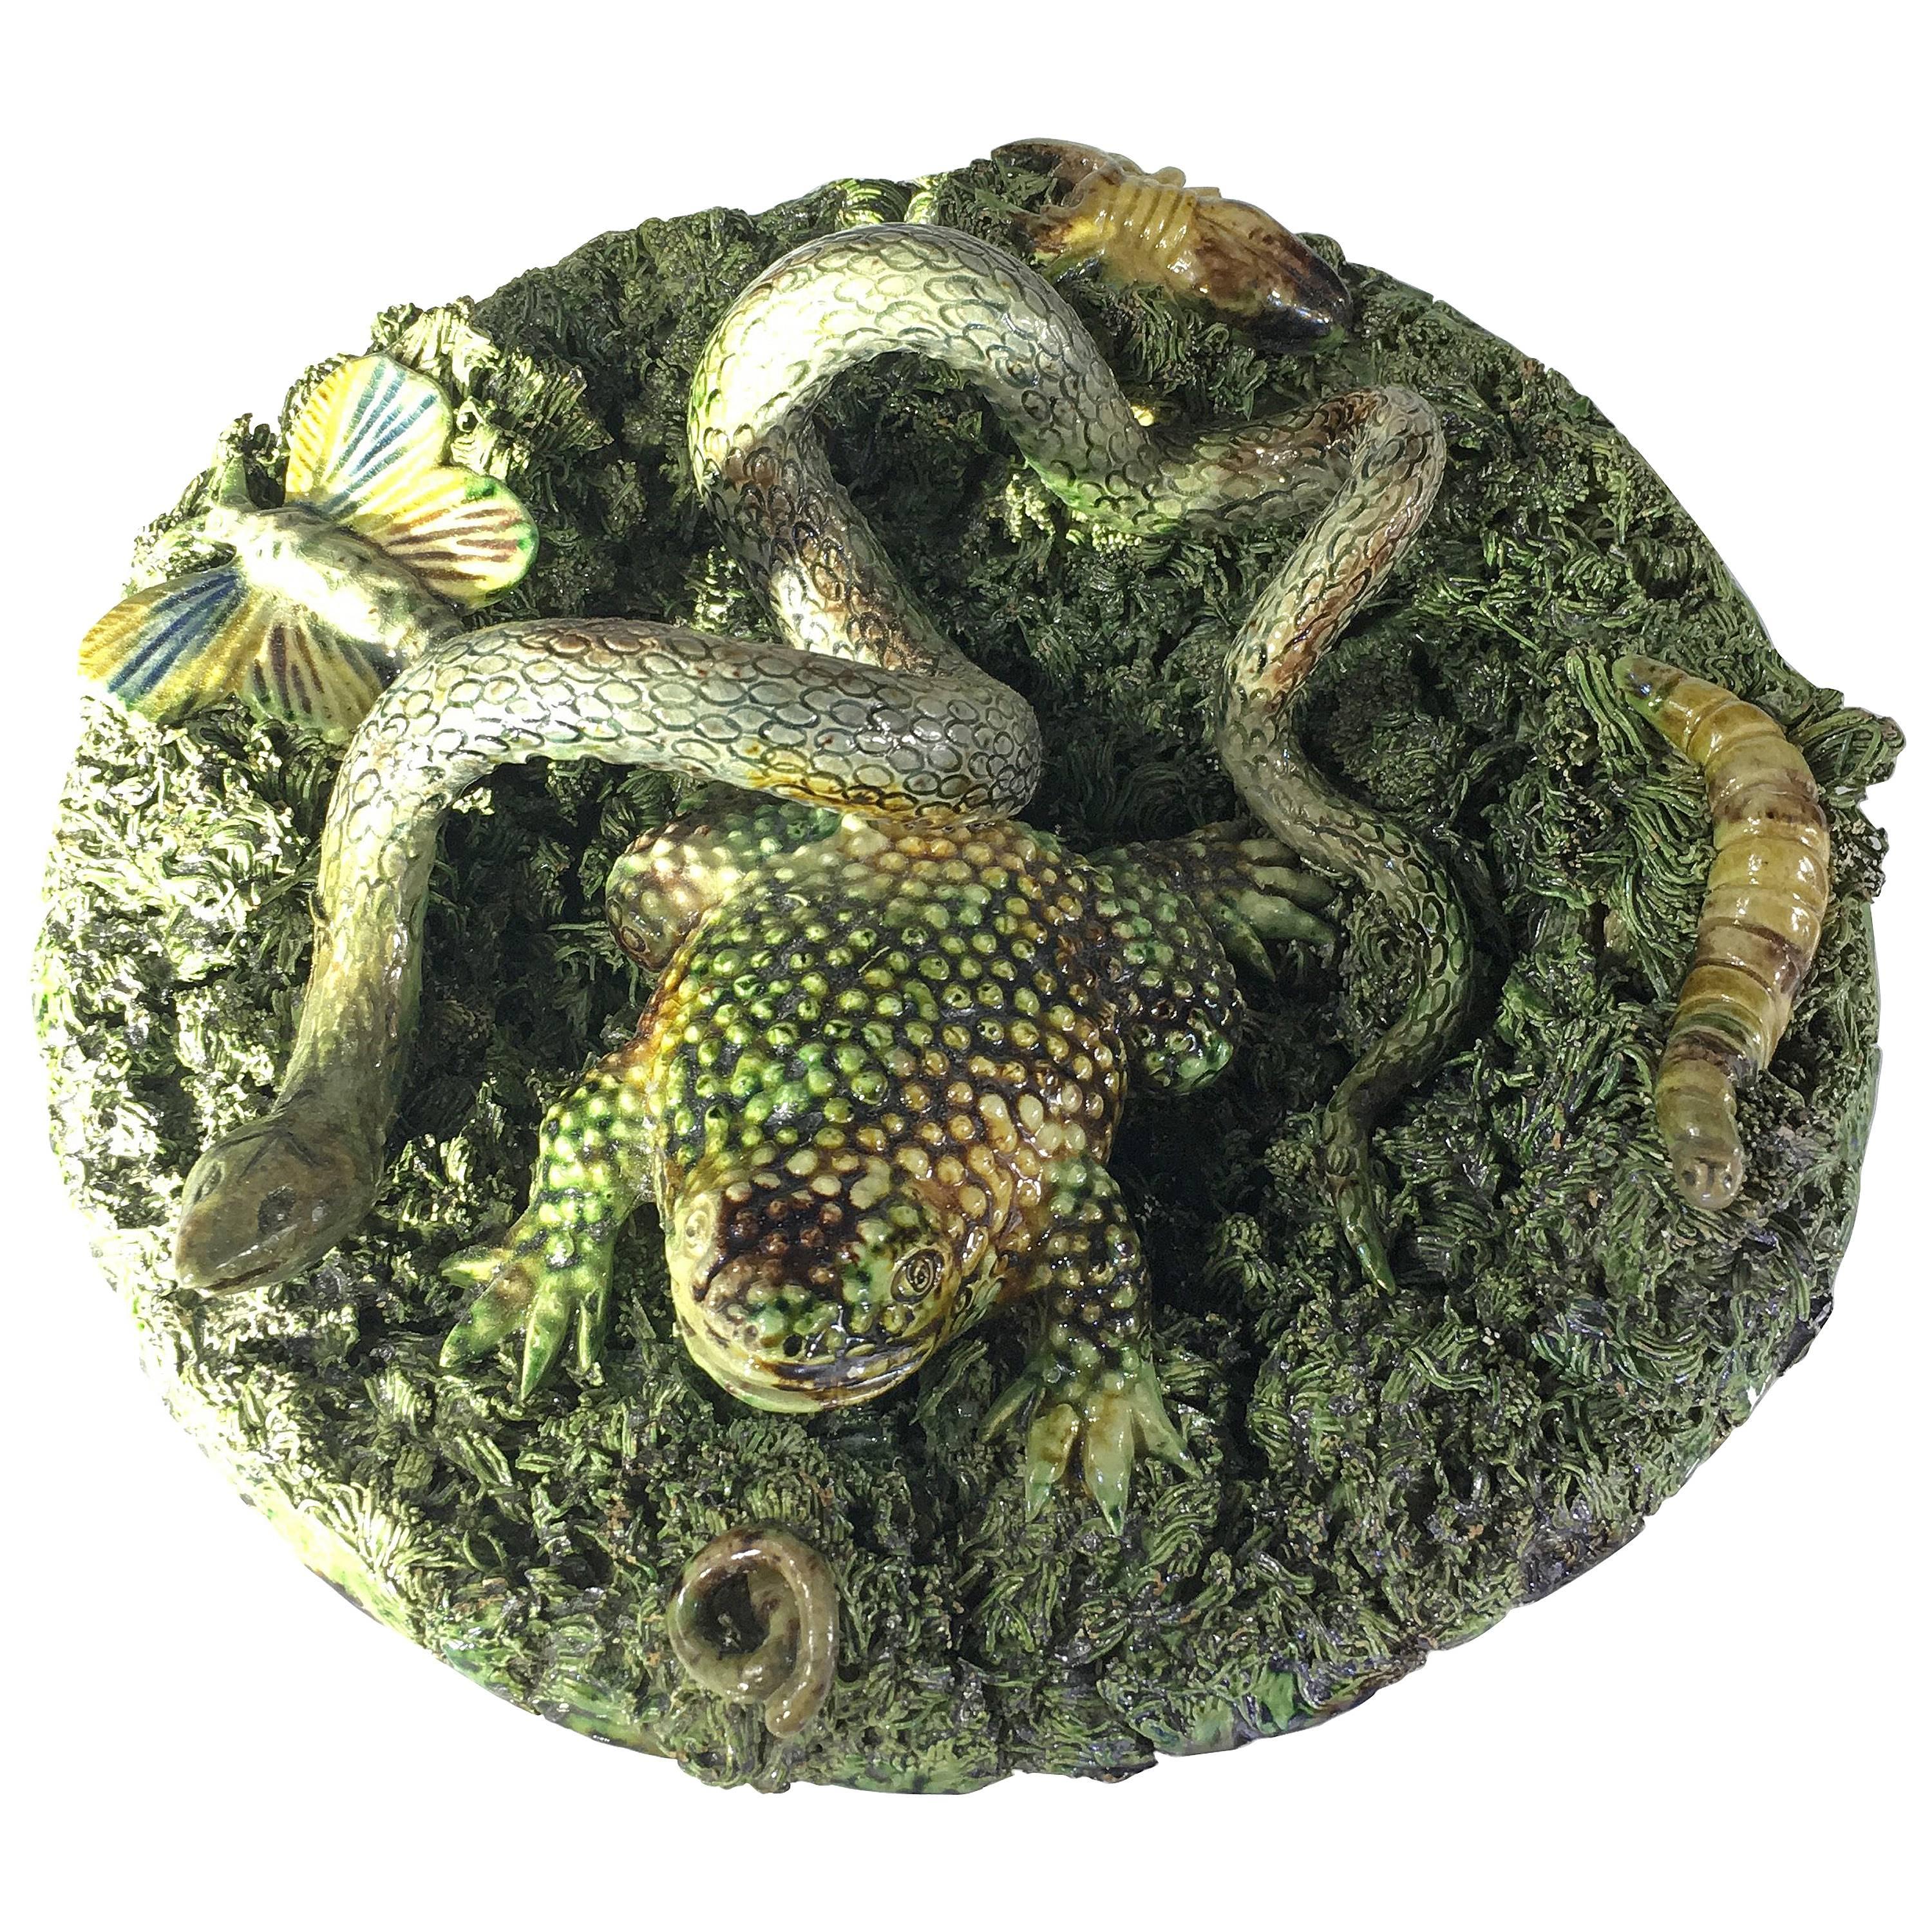 Pallisy Type Dish with Frog, Snake, Worm and Grub by Jose Cunha, Portugal